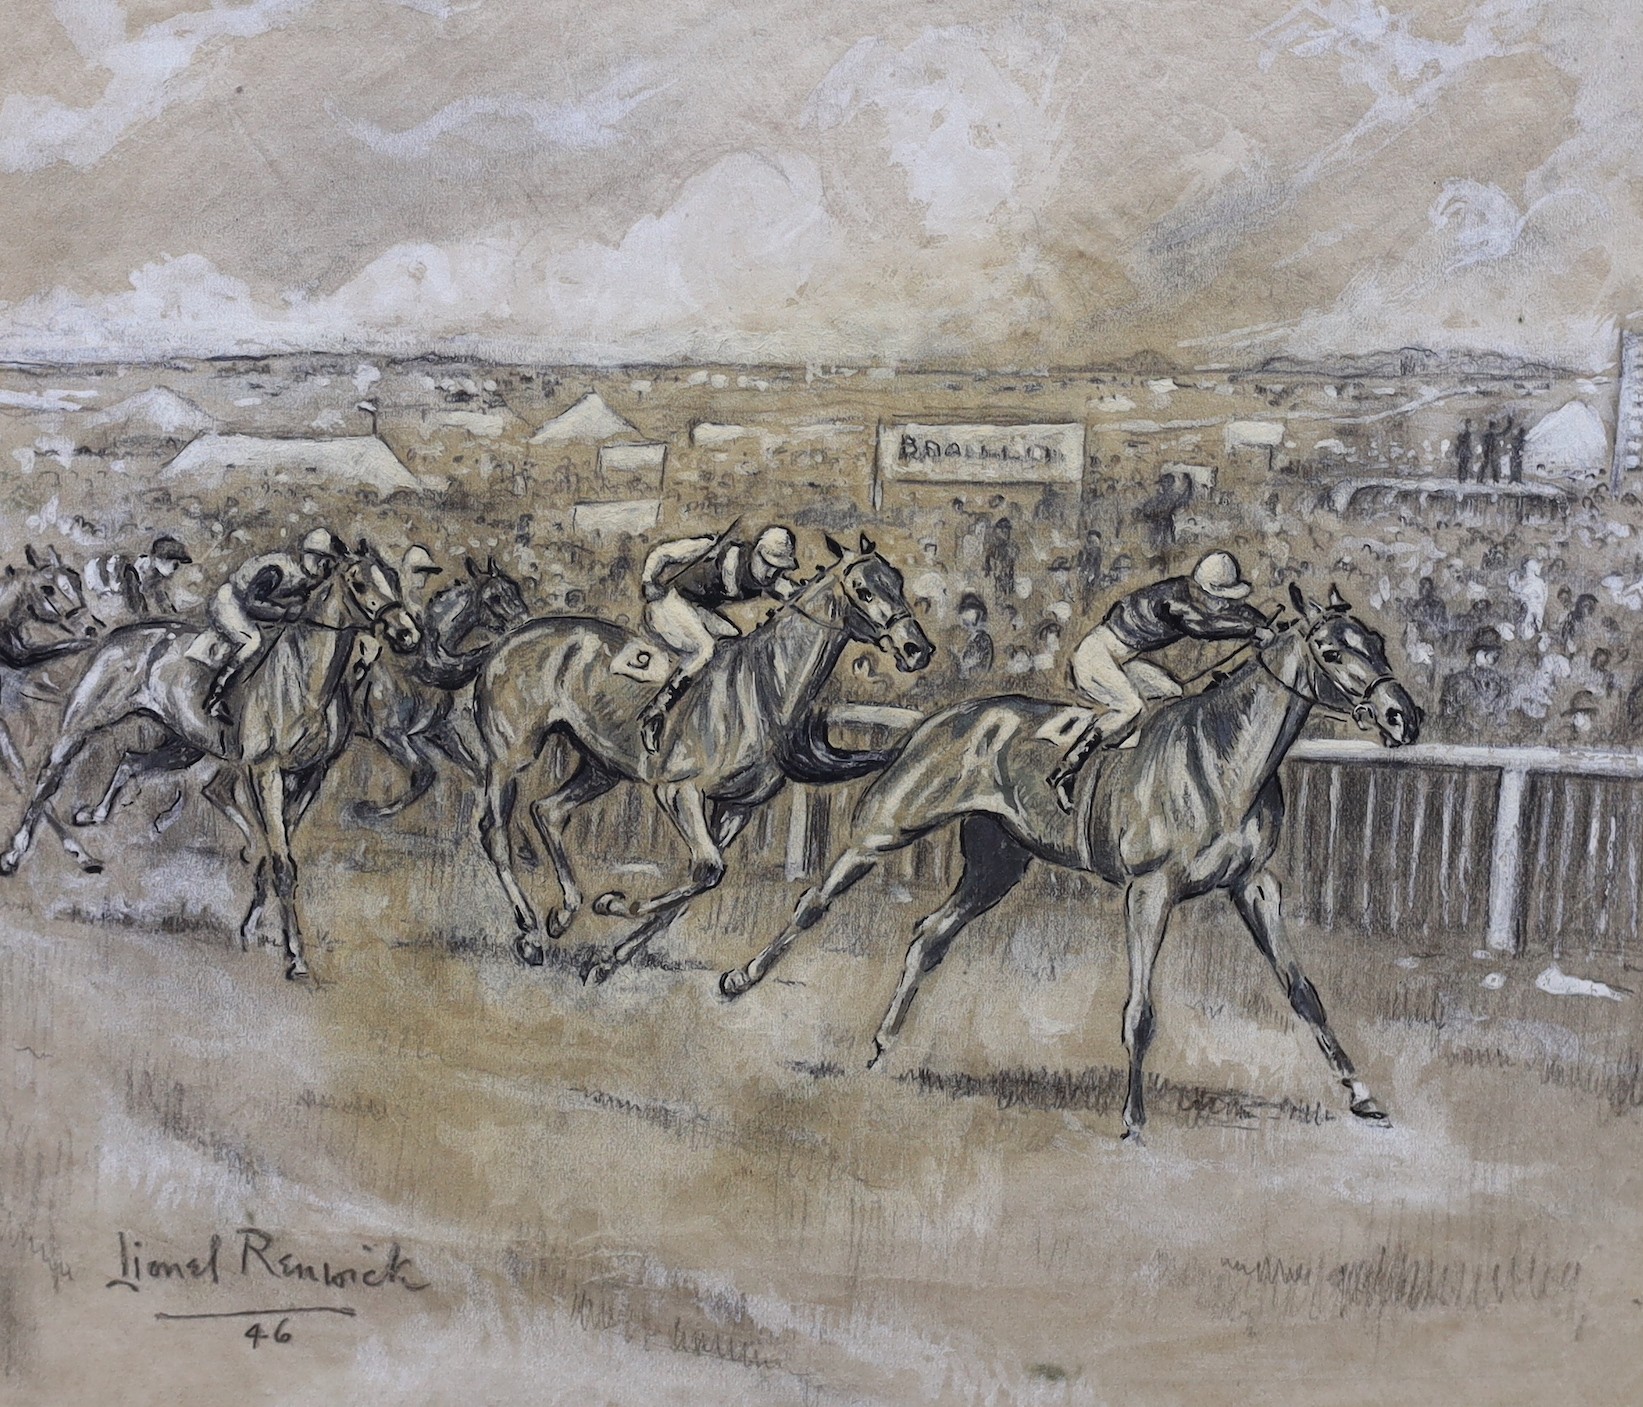 Lionel Hamilton Renwick (1917-2003), two ink and wash illustrations, Horse racing scenes, one signed and dated '46, 17 x 20cm and 17 x 22cm, unframed